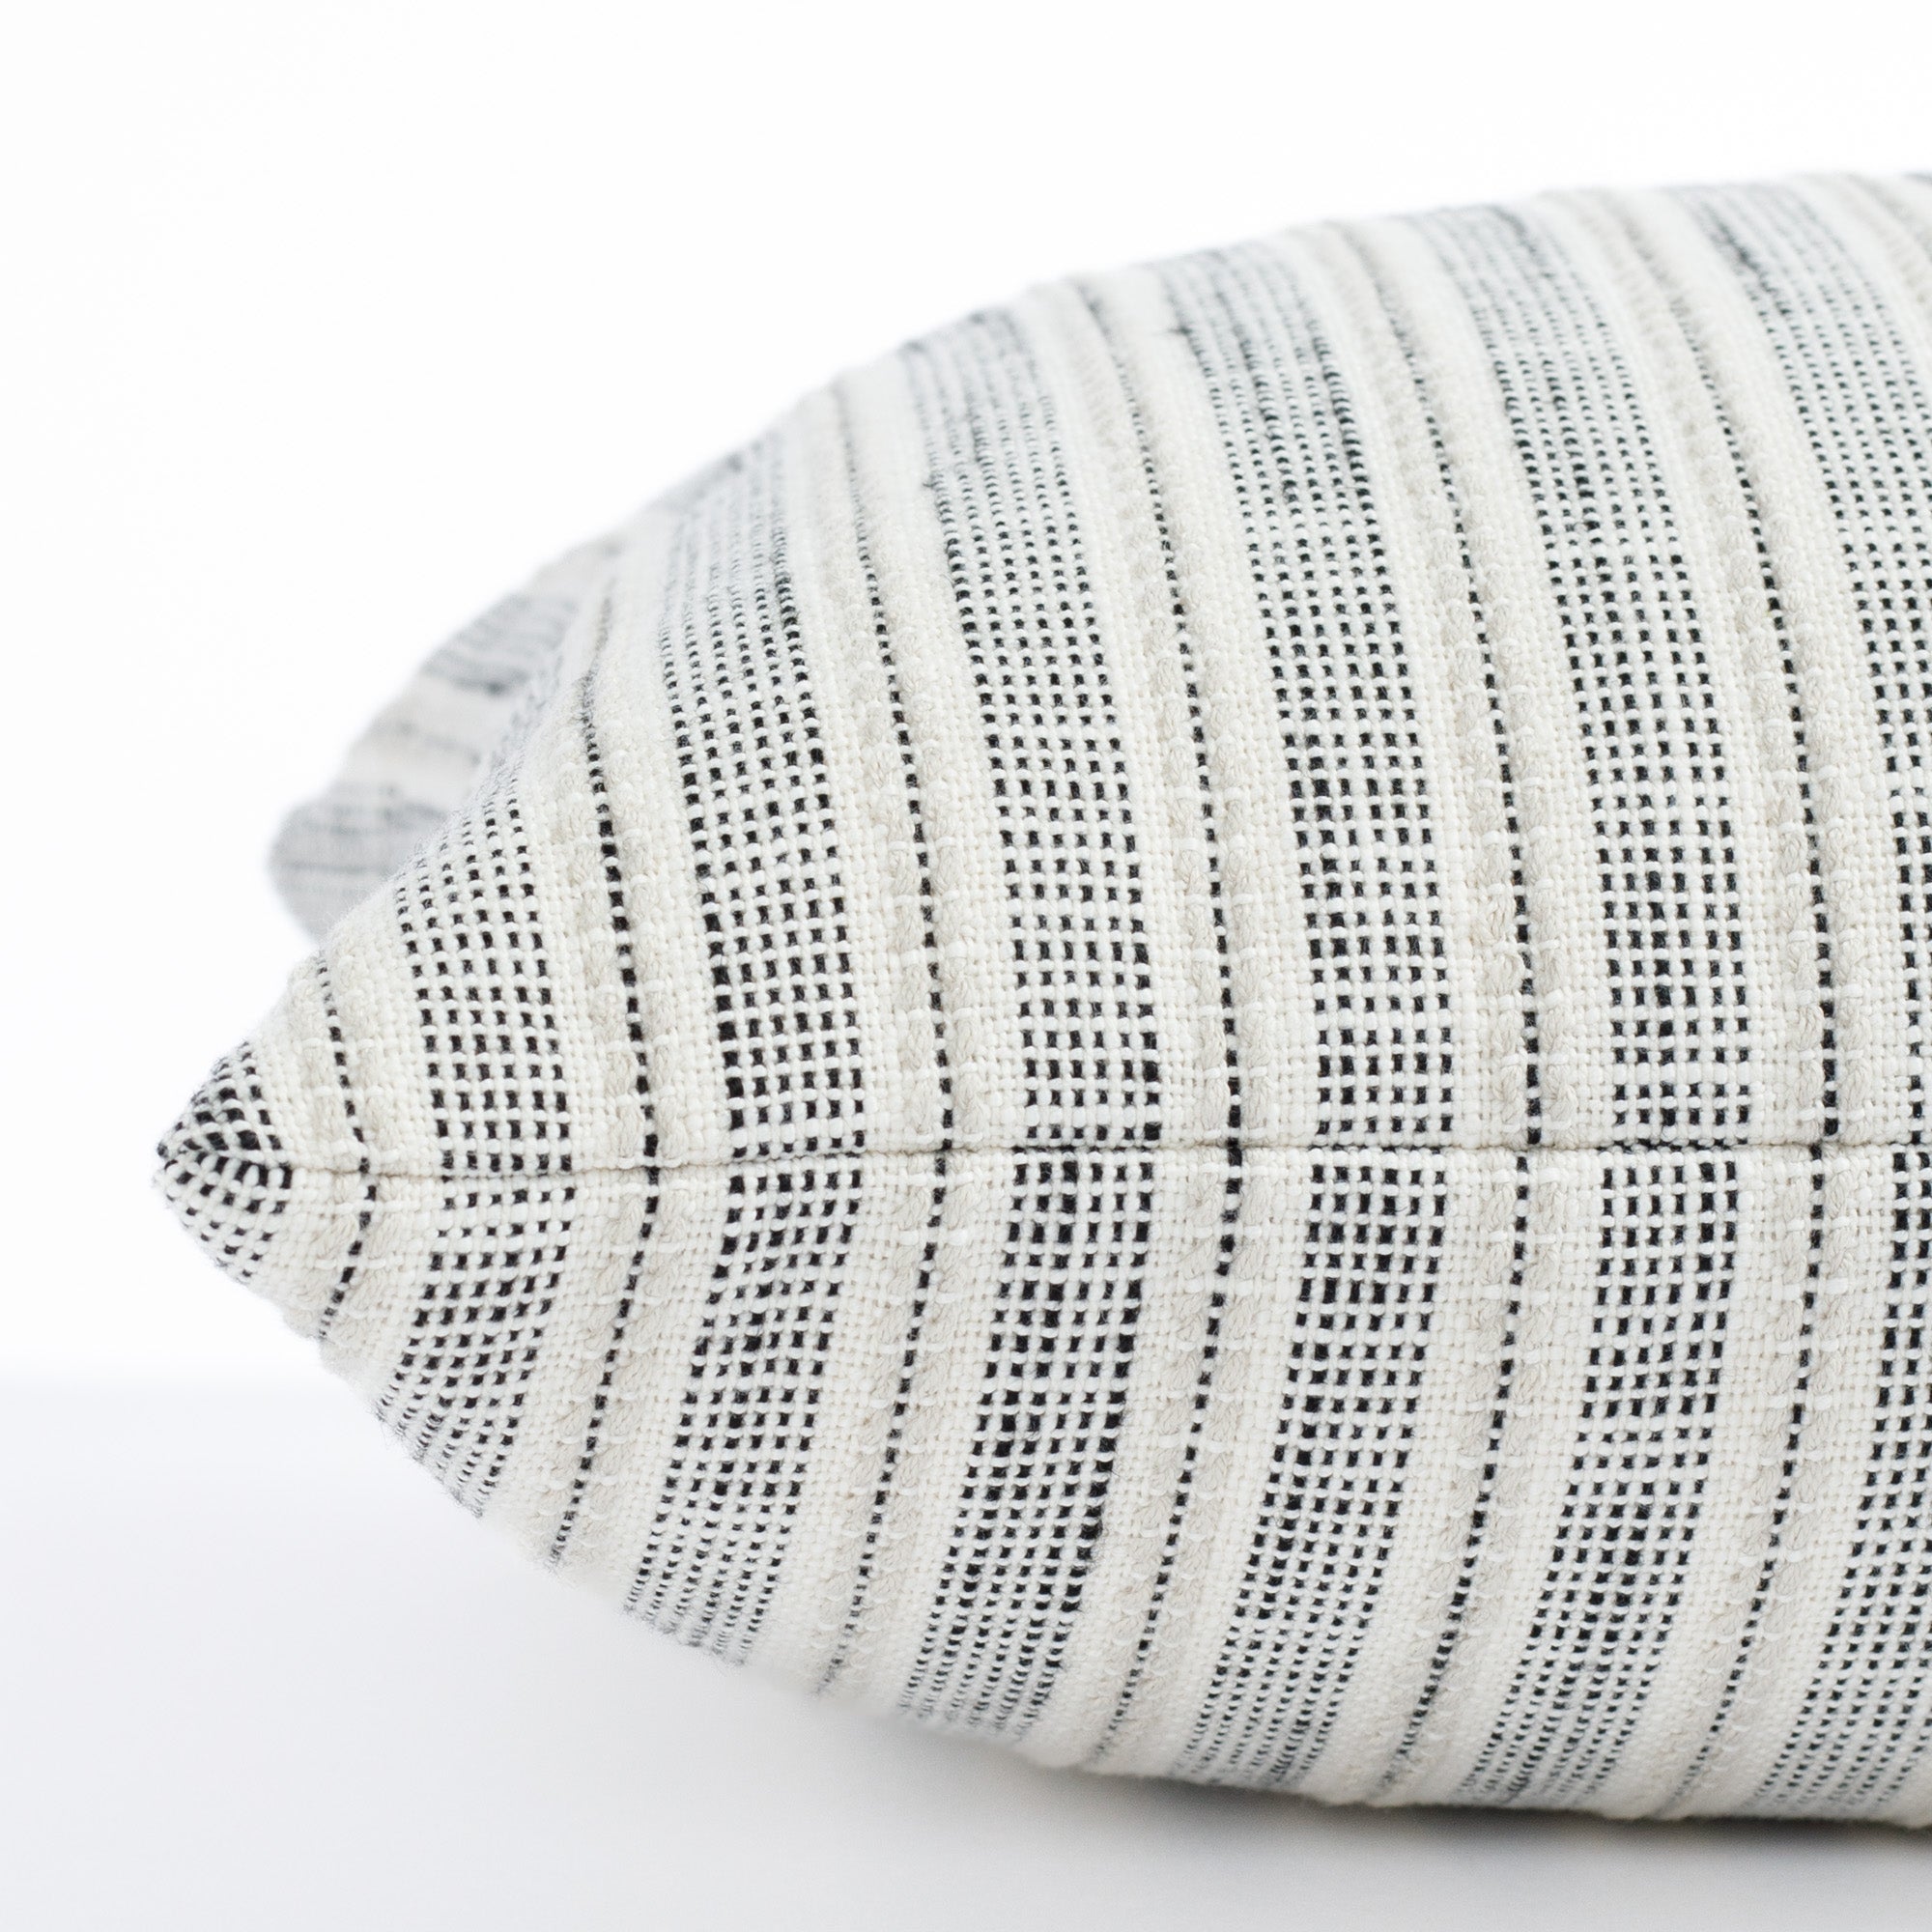 cream and black striped throw pillow : close up side view